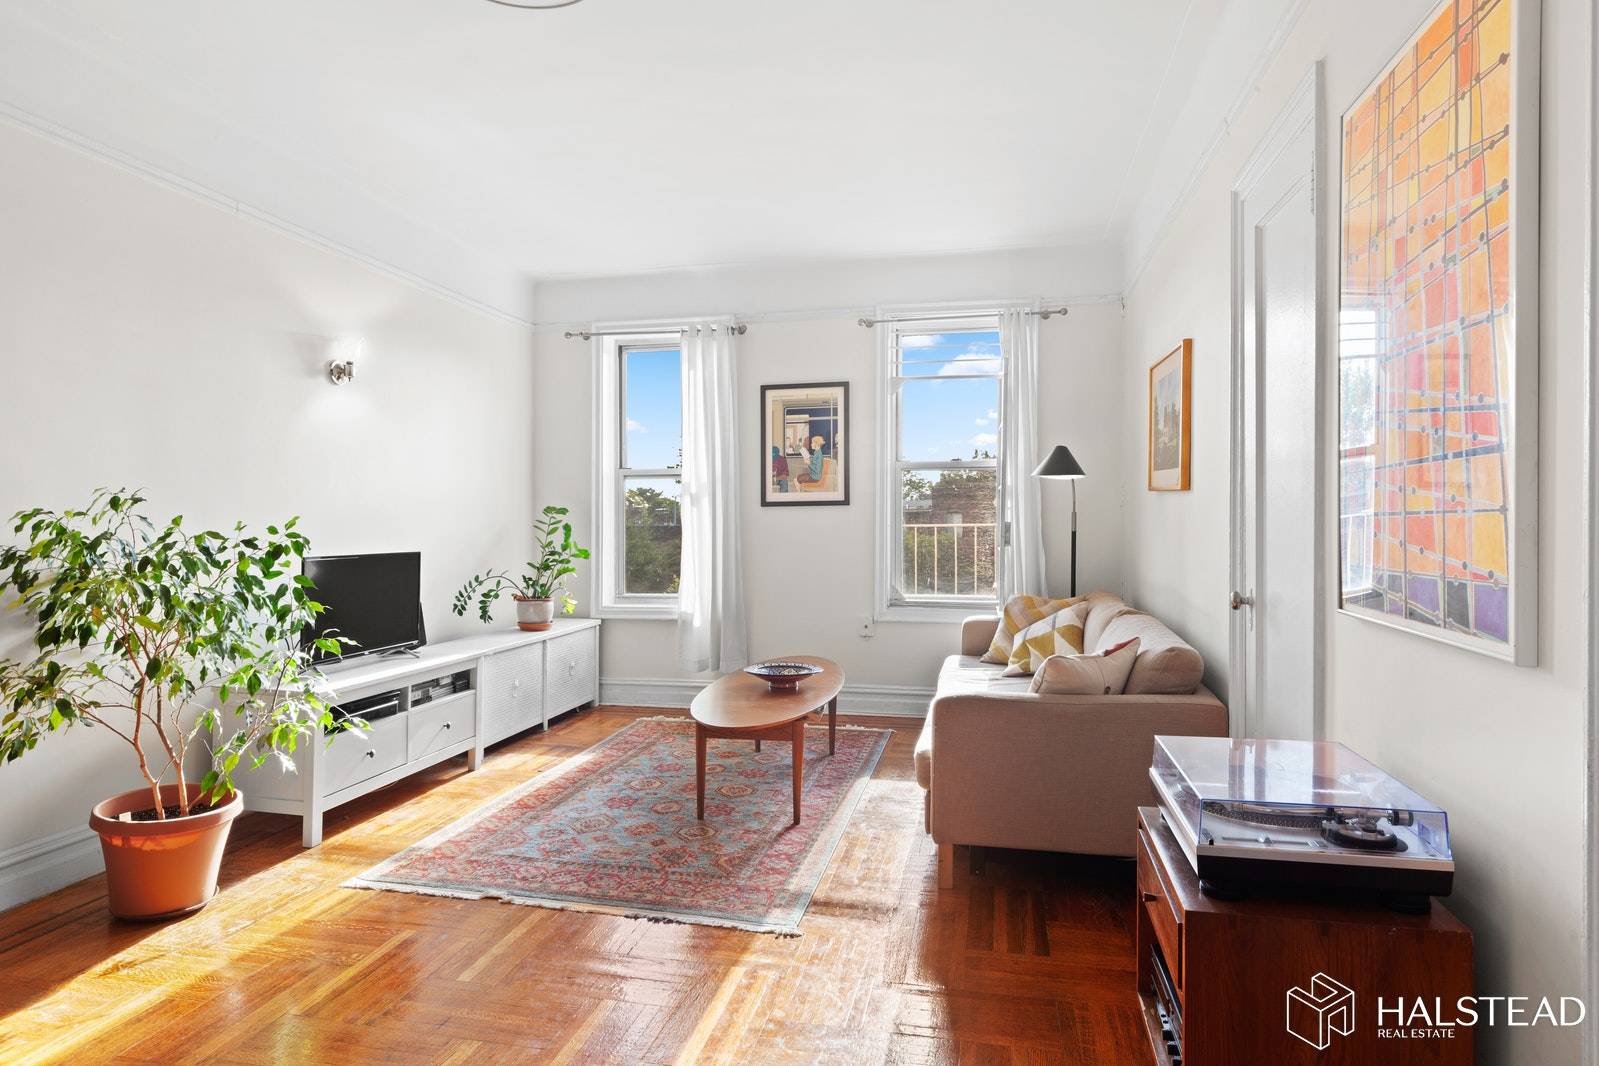 Set in idyllic Clinton Hill near the border of Fort Greene, this tranquil 1BR residence is certain to charm you.